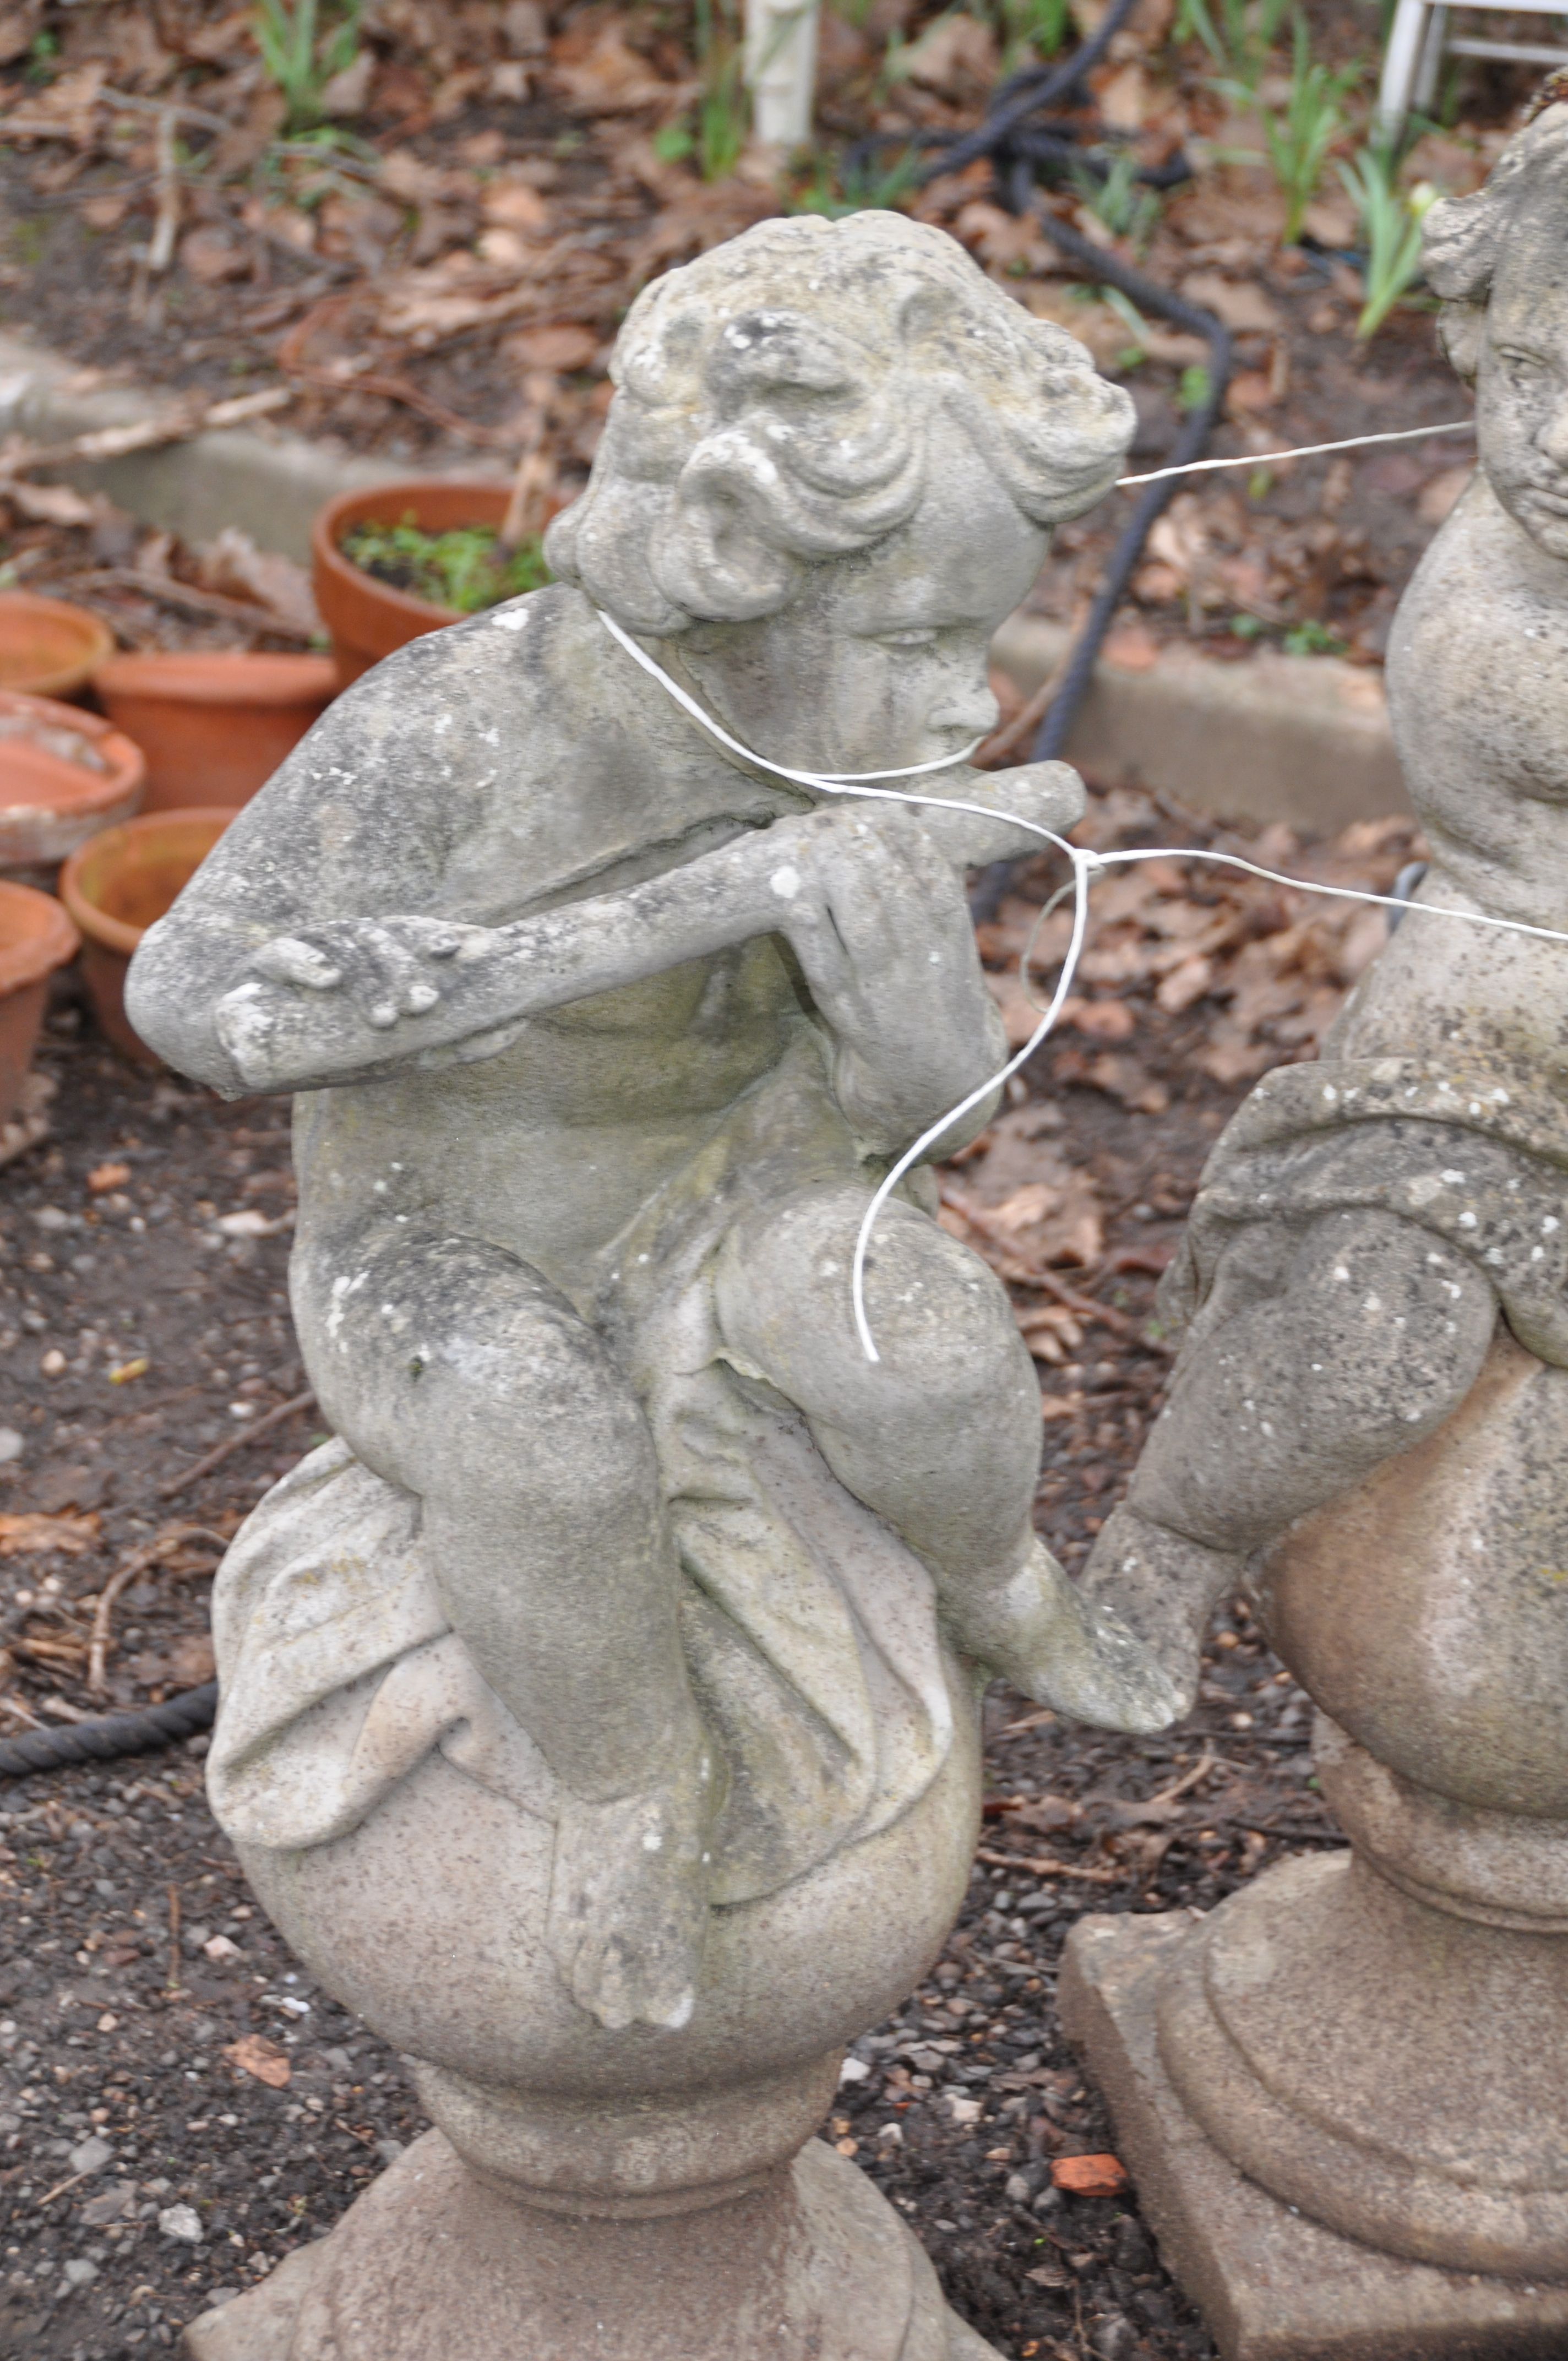 A SET OF THREE MOULDED GARDEN FIGURES IN THE FORM OF CHILDREN EACH PLAYING A MUSICAL INSTRUMENT - Image 2 of 4